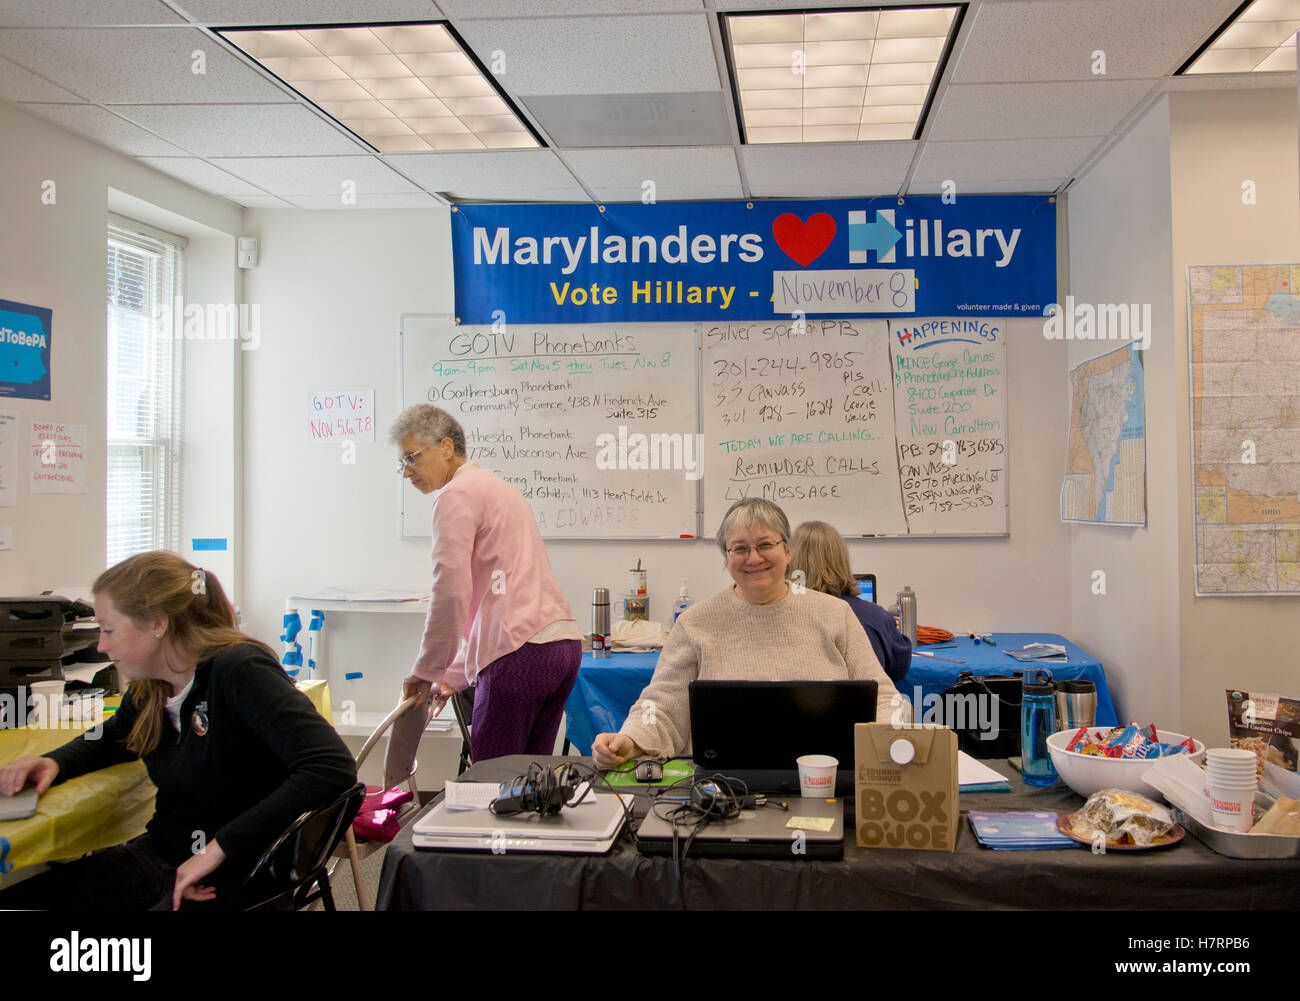 Gaithersburg, USA. 07th Nov, 2016. Gaithersburg, MD November 7 2016, USA: In the final day of the Presidential elections, the Montgomery County, MD Democratic campaign in Gaithersburg, MD has phone banks staffed by volunteers calling people and encouraging them to vote for Hillary Clinton on November 8, 2016. Credit:  Patsy Lynch/Alamy Live News Stock Photo